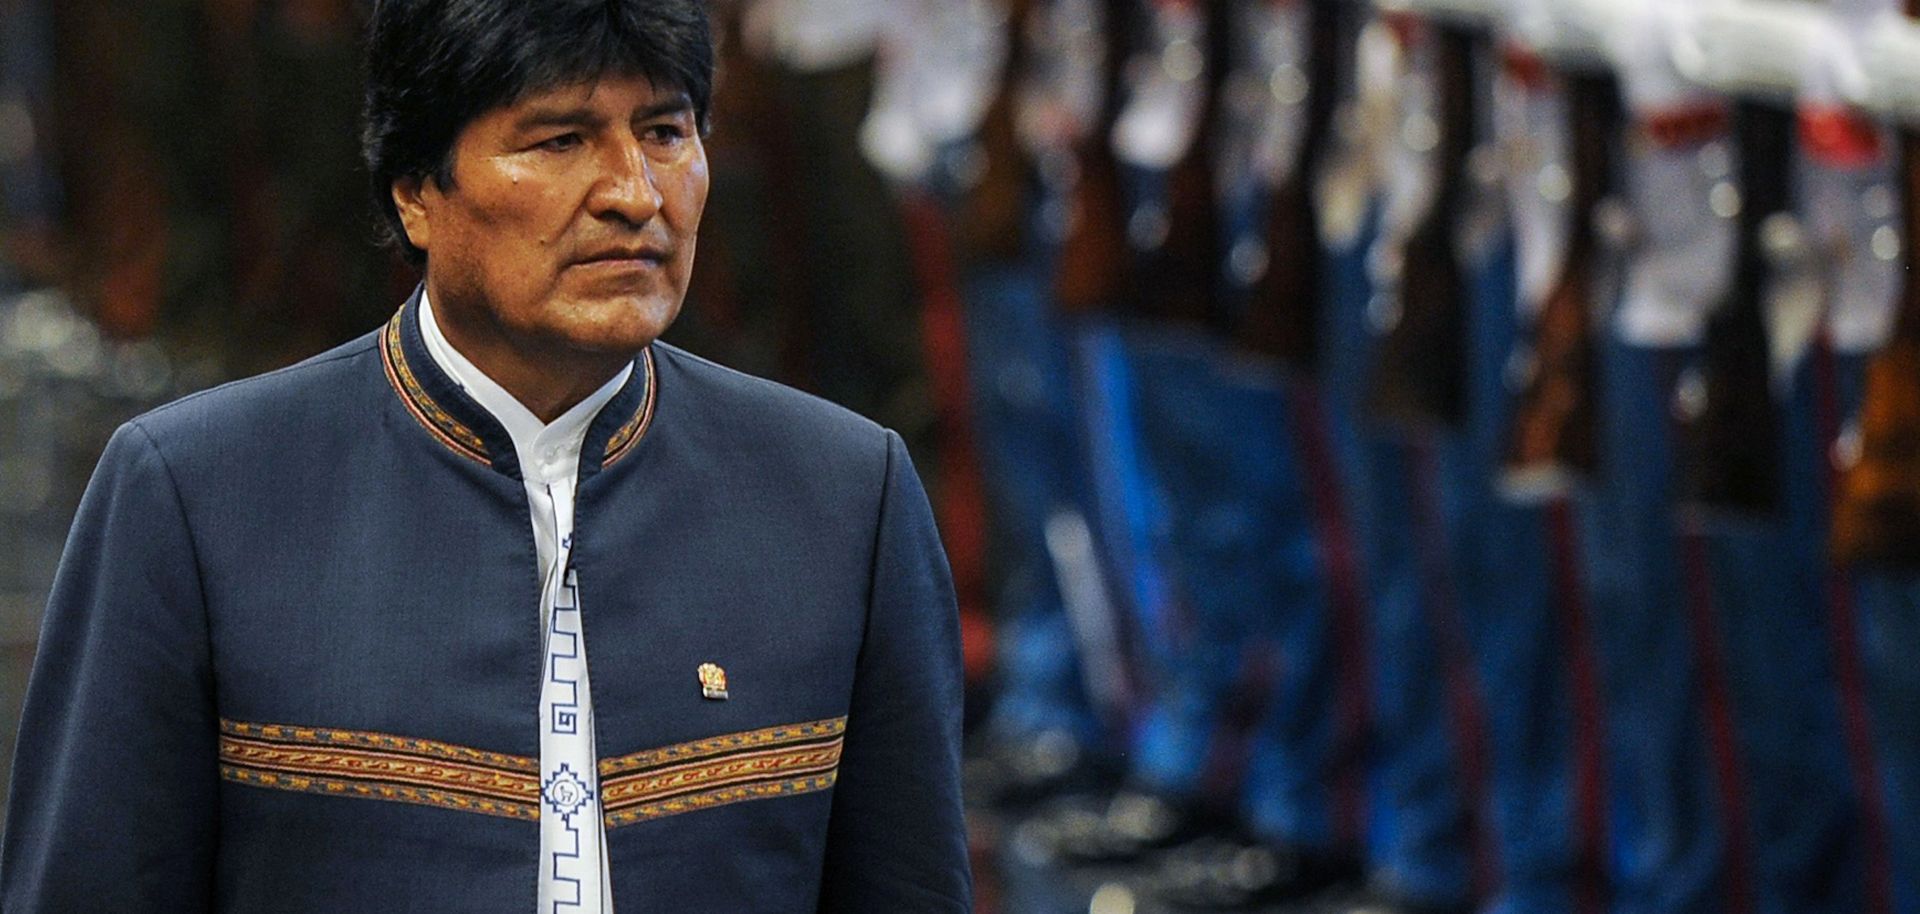 In Bolivia, a New Referendum on the Same President